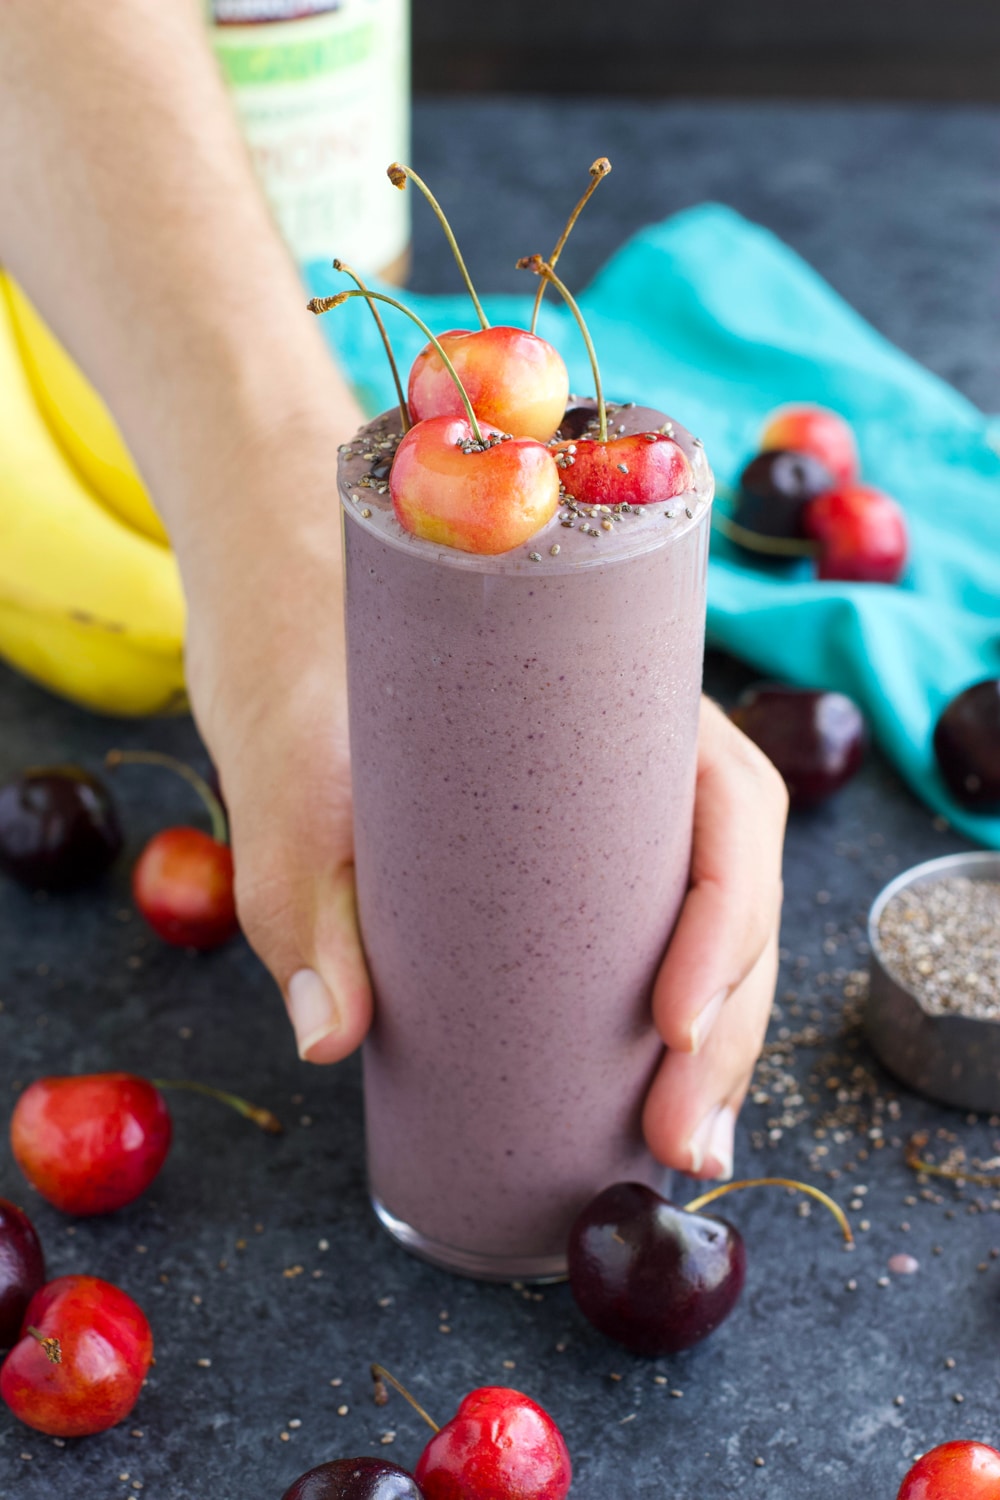 A hand holding a smoothie topped with cherries in a glass cup on a dark background.